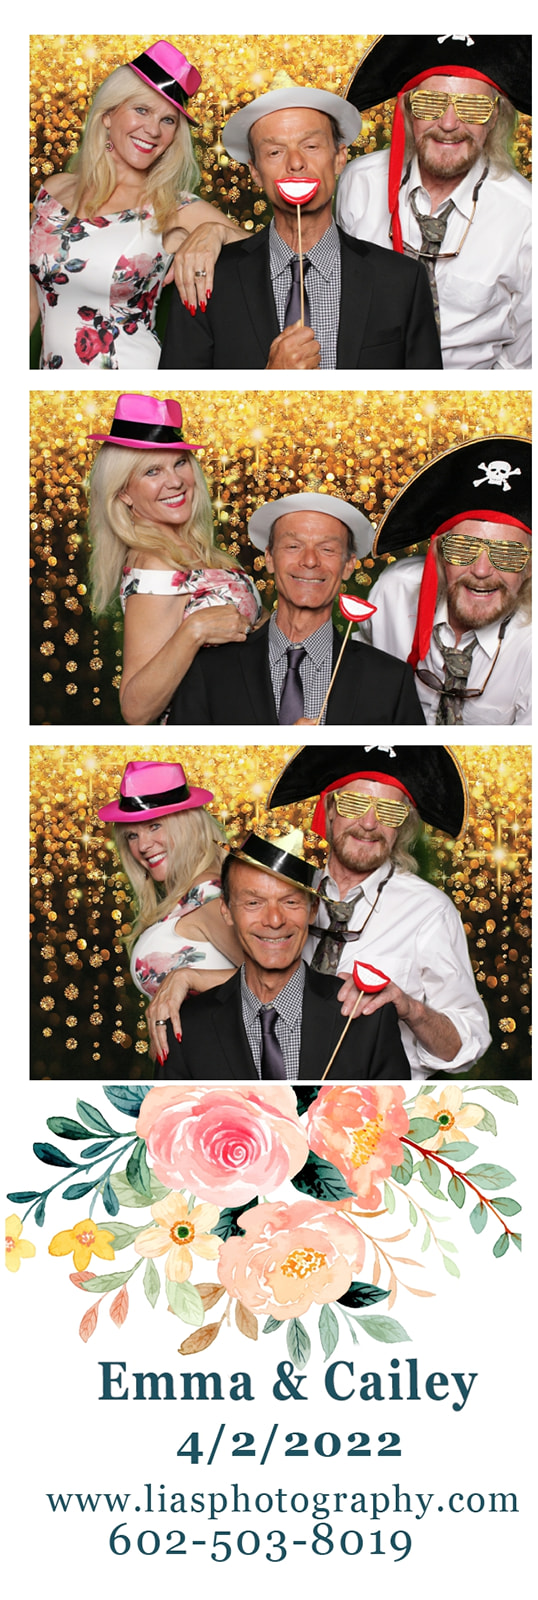 Photobooth for Weddings Birthday parties Corporate events